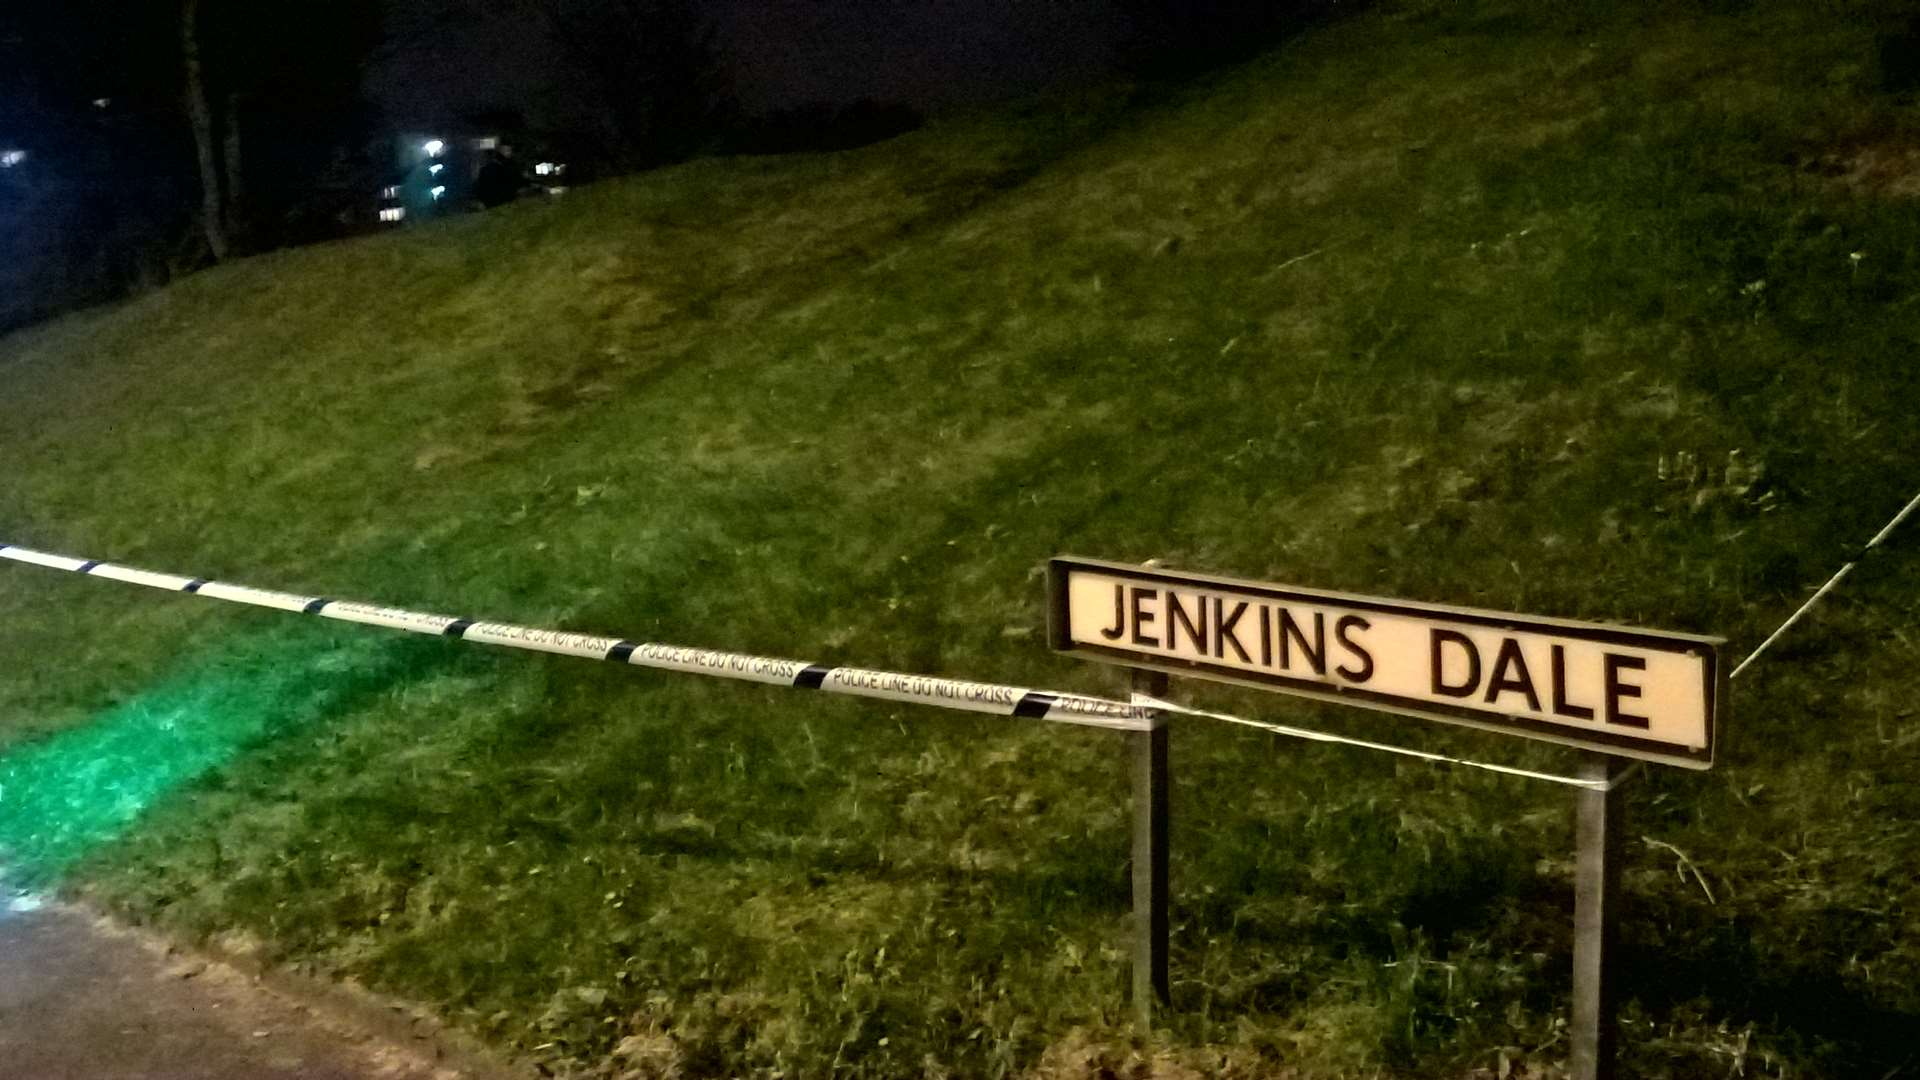 The attack took place in Jenkins Dale